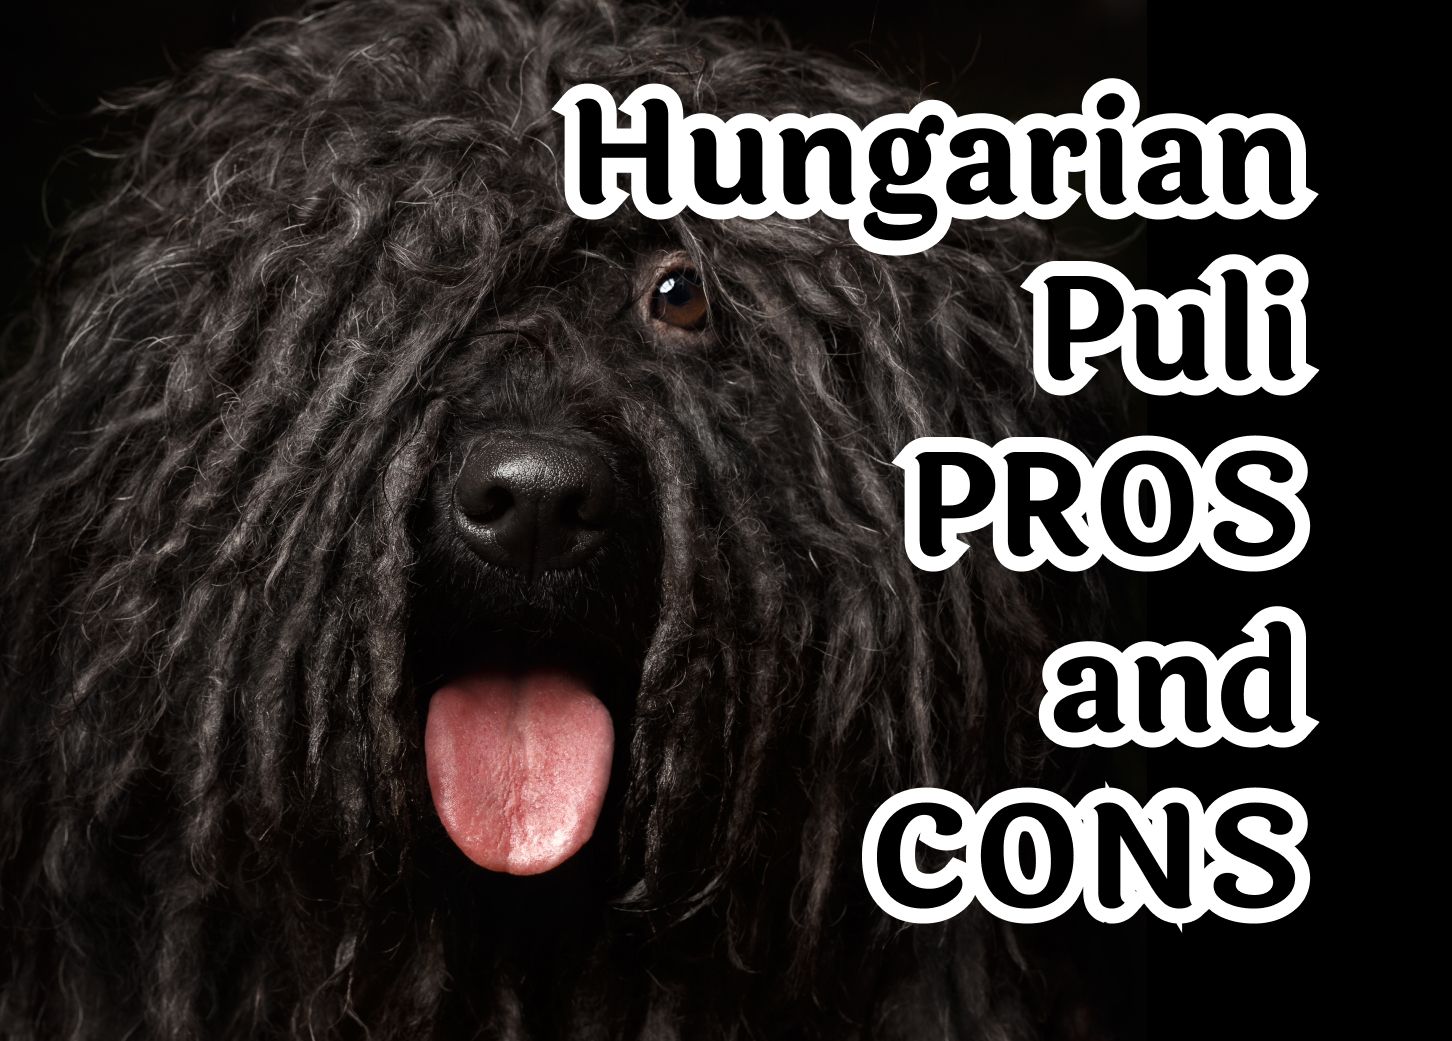 The 7 characteristics that make the Hungarian Puli special